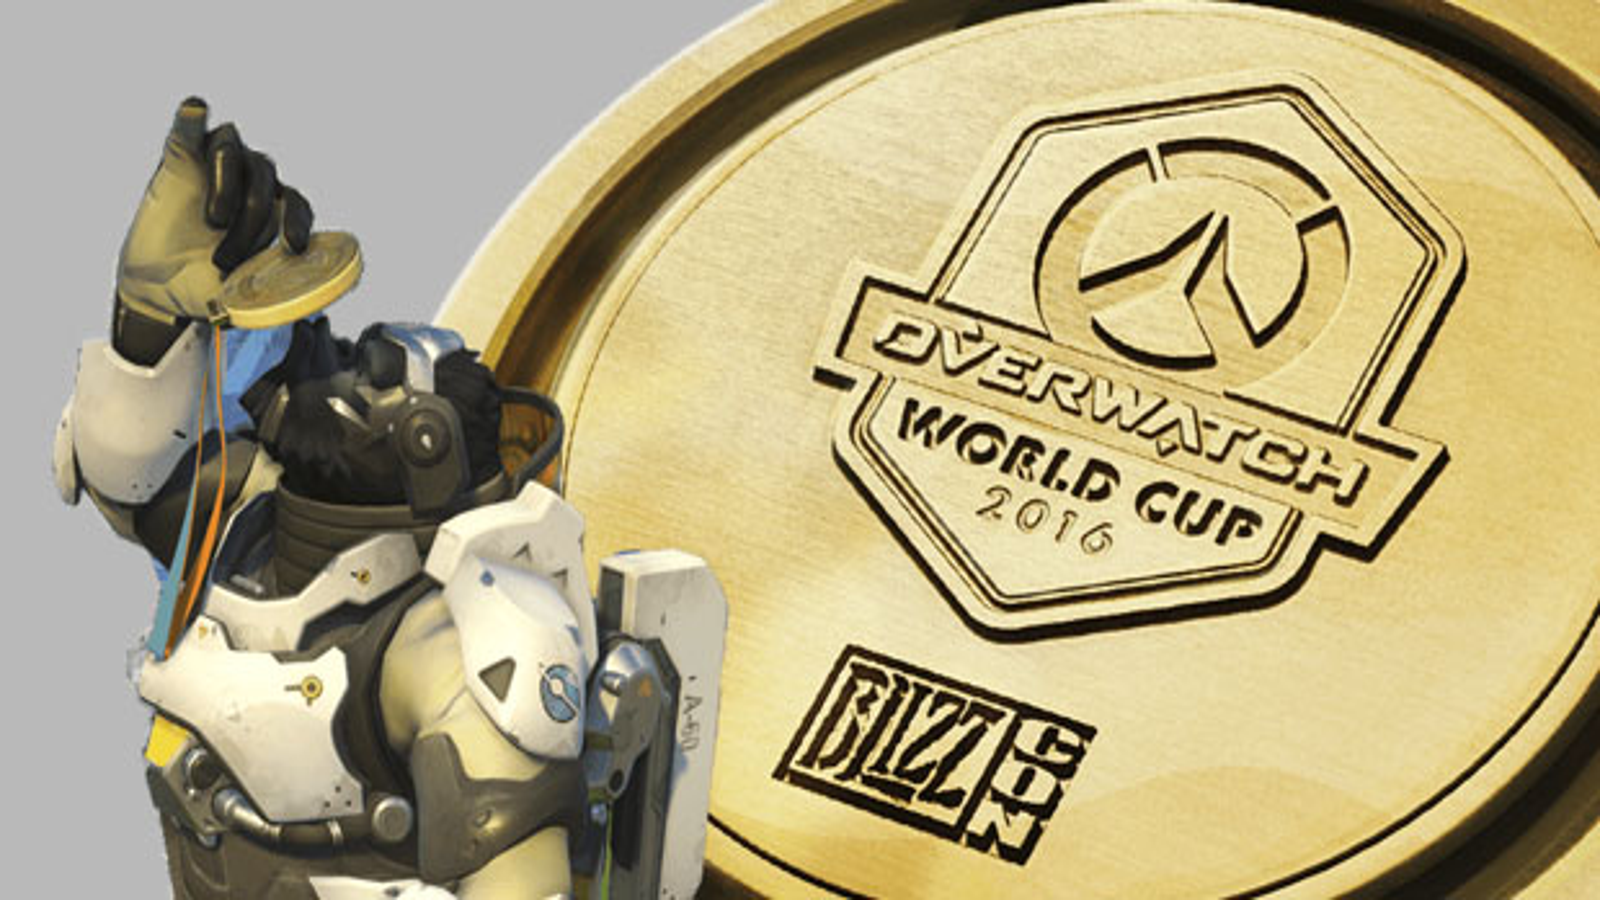 Overwatch World Cup - Who will be the first World Champion? - Dafa Esports